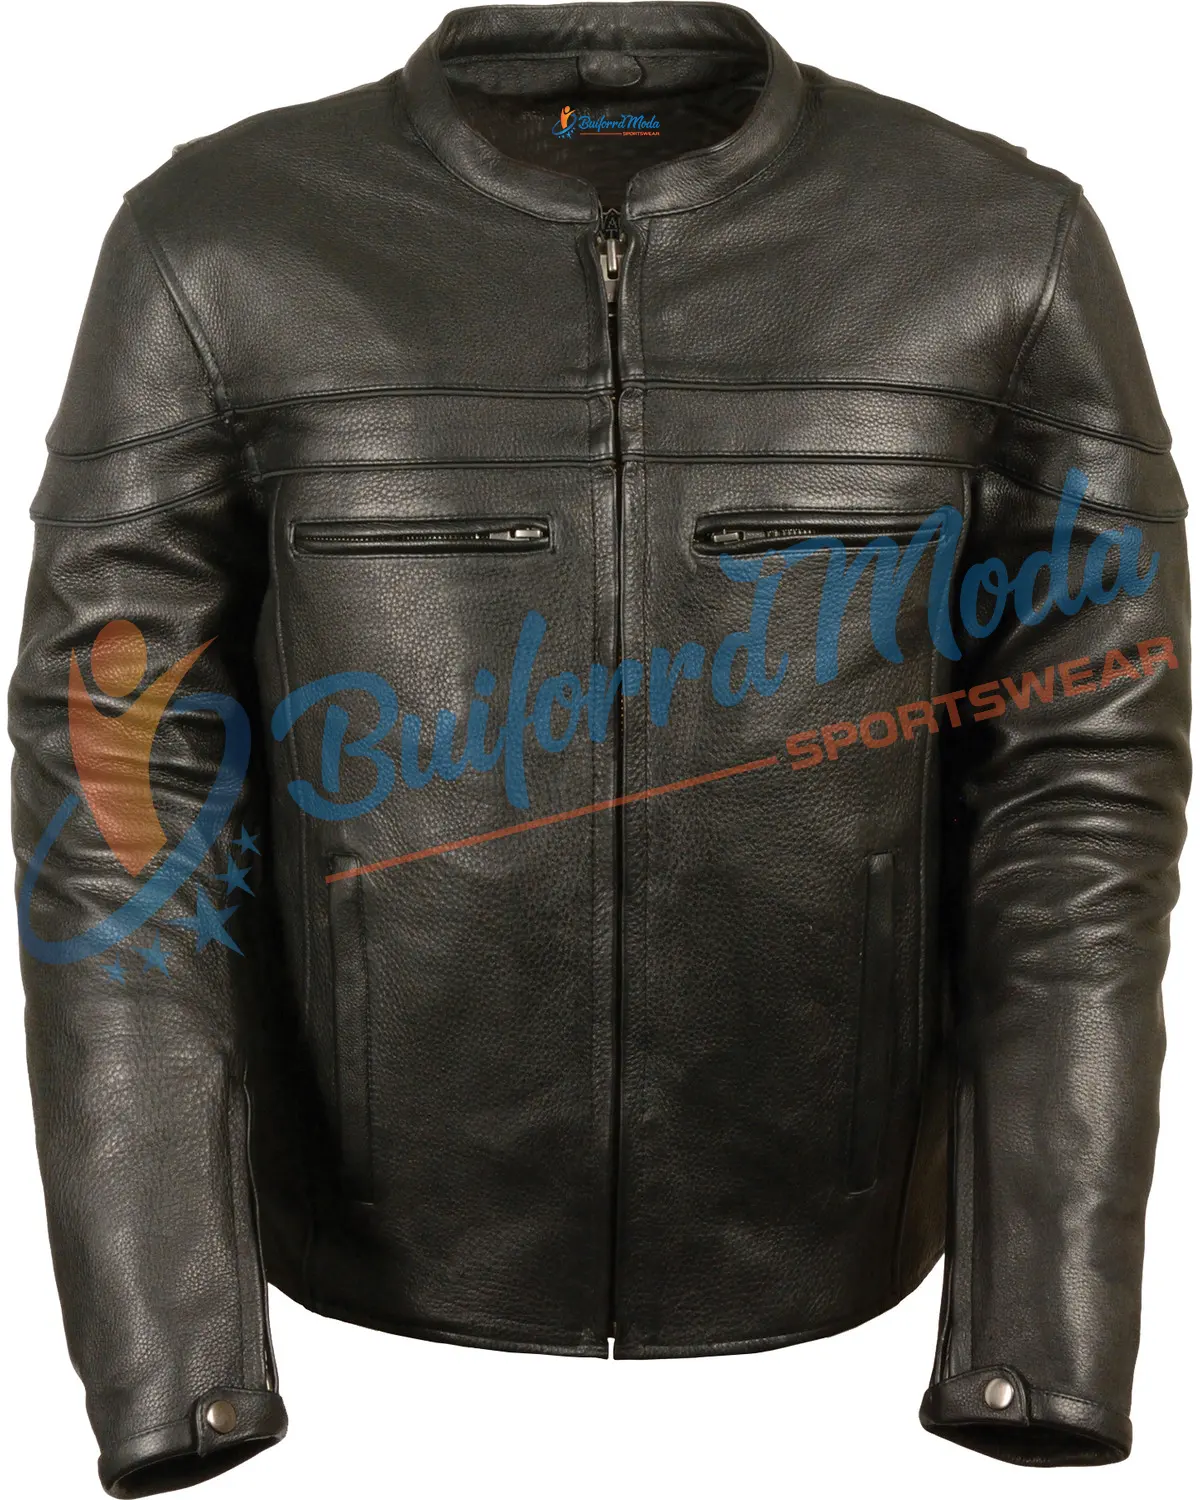 High Quality Genuine Leather Jackets For Best Hot Sale Men Leather Jacket Winter Collection Warm Up Pure Leather Staff